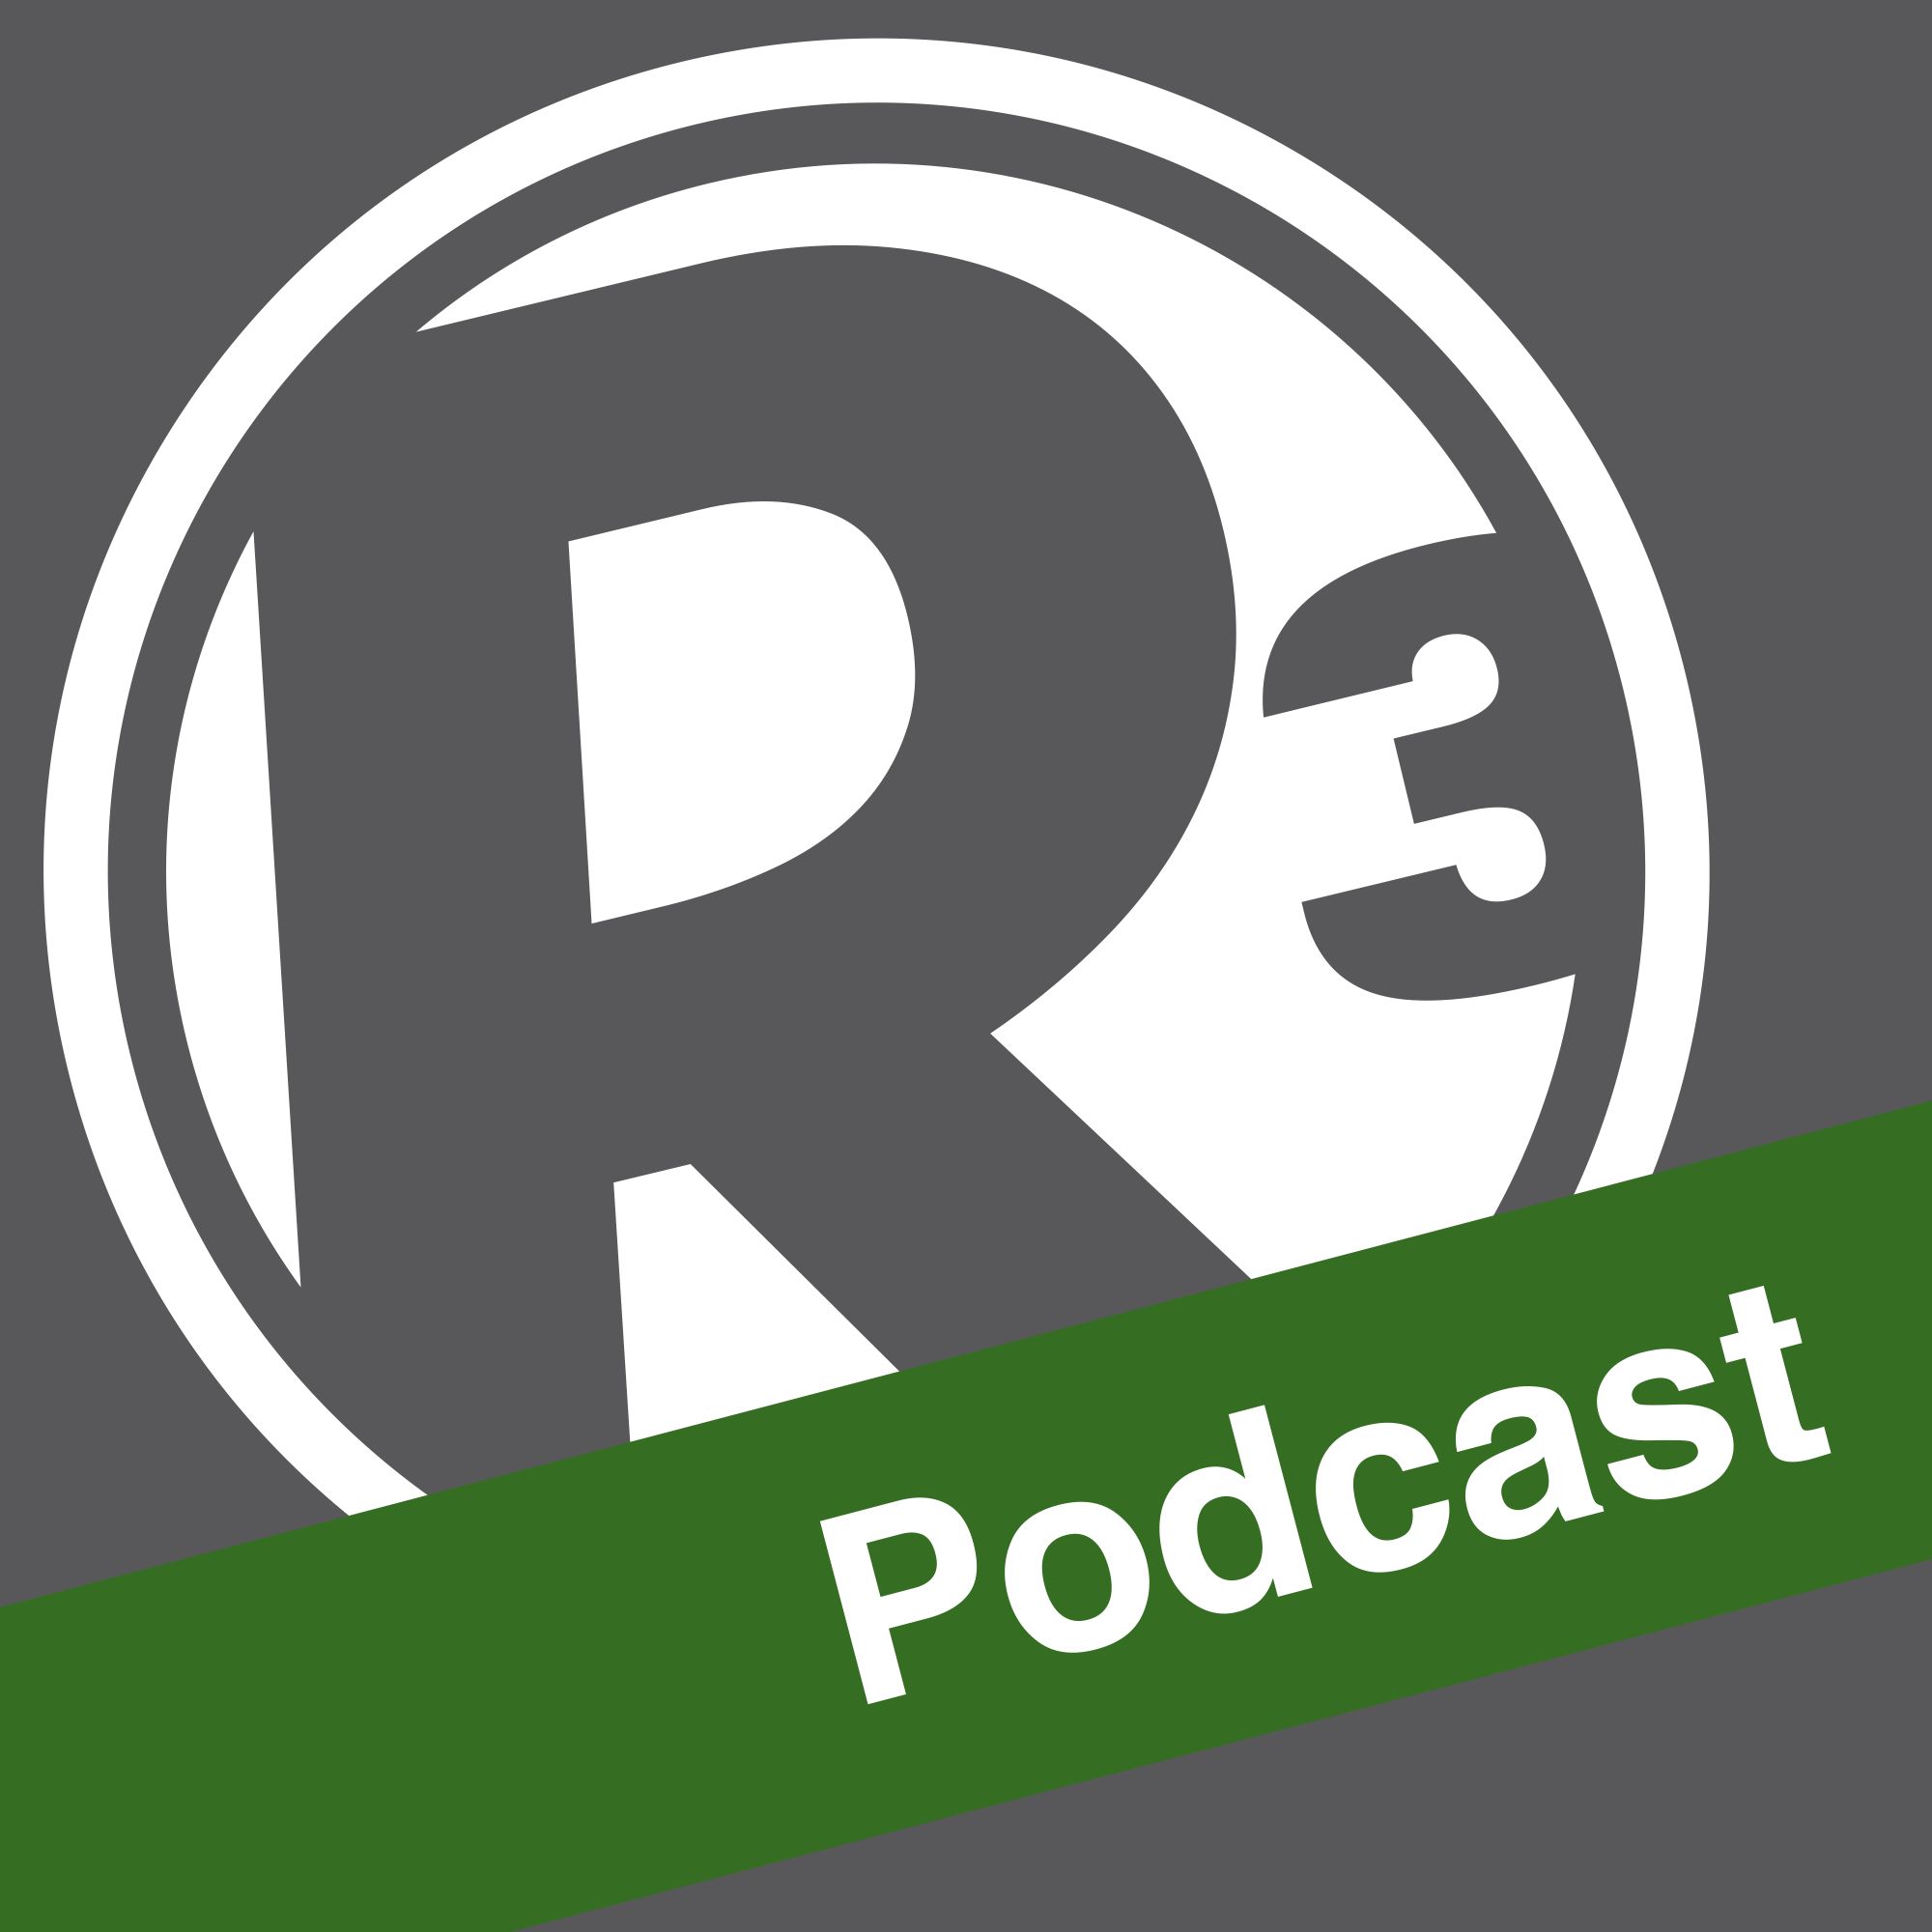 R3 Podcasts